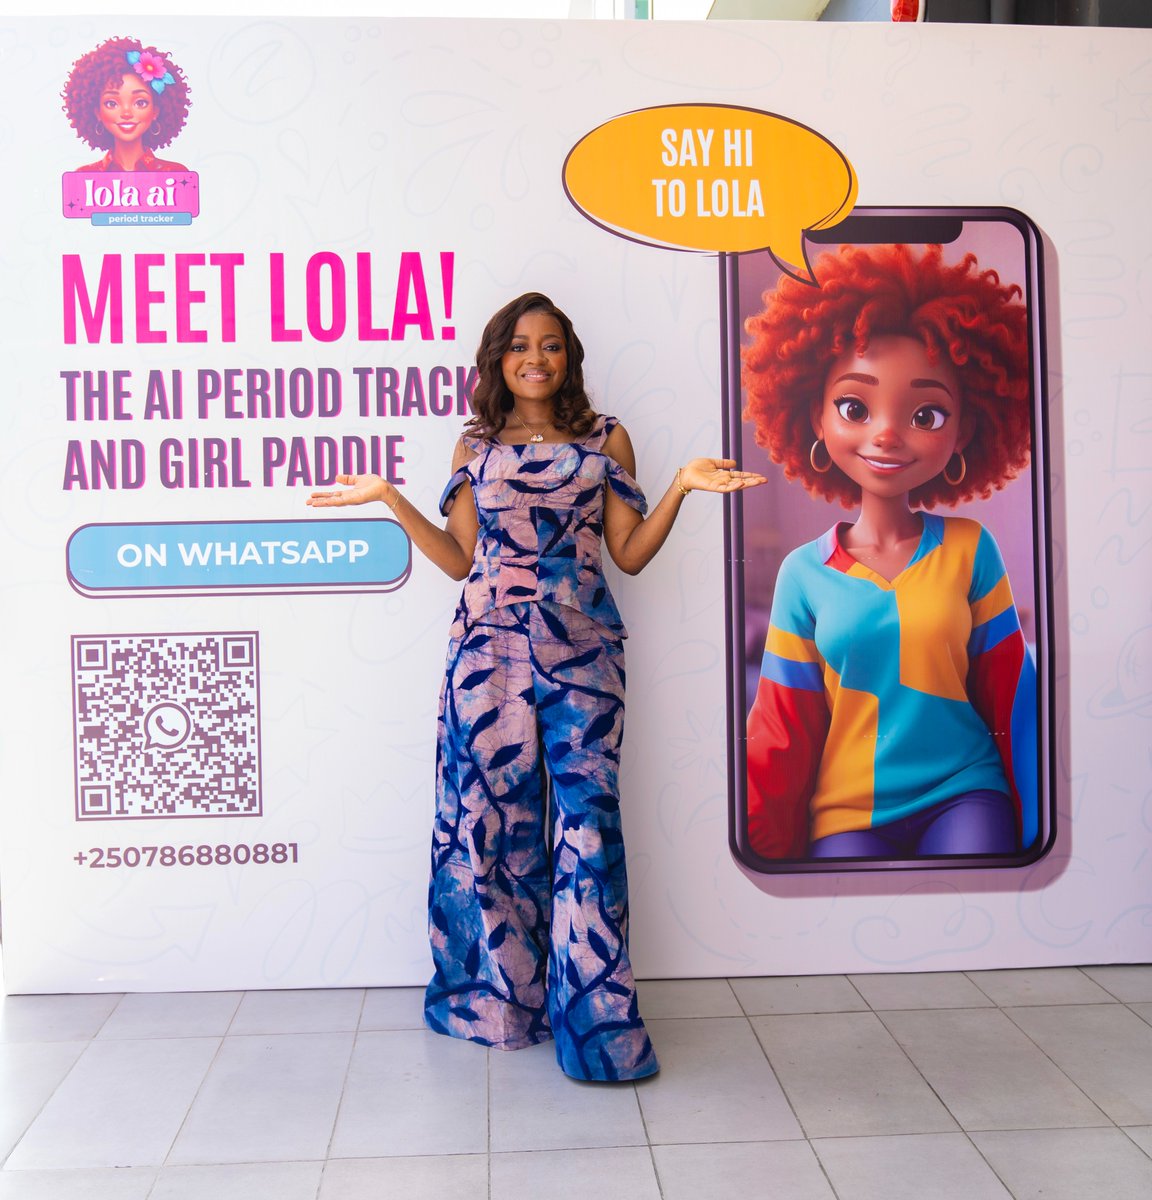 This has been cooking for so long, so I am beyond excited to share Lola with you all. Meet Lola AI by @healthtracka Lola AI is your menstrual health bestie - She is your AI period tracker on WhatsApp, she is your girlfriend with all the cool tips about your menstrual health